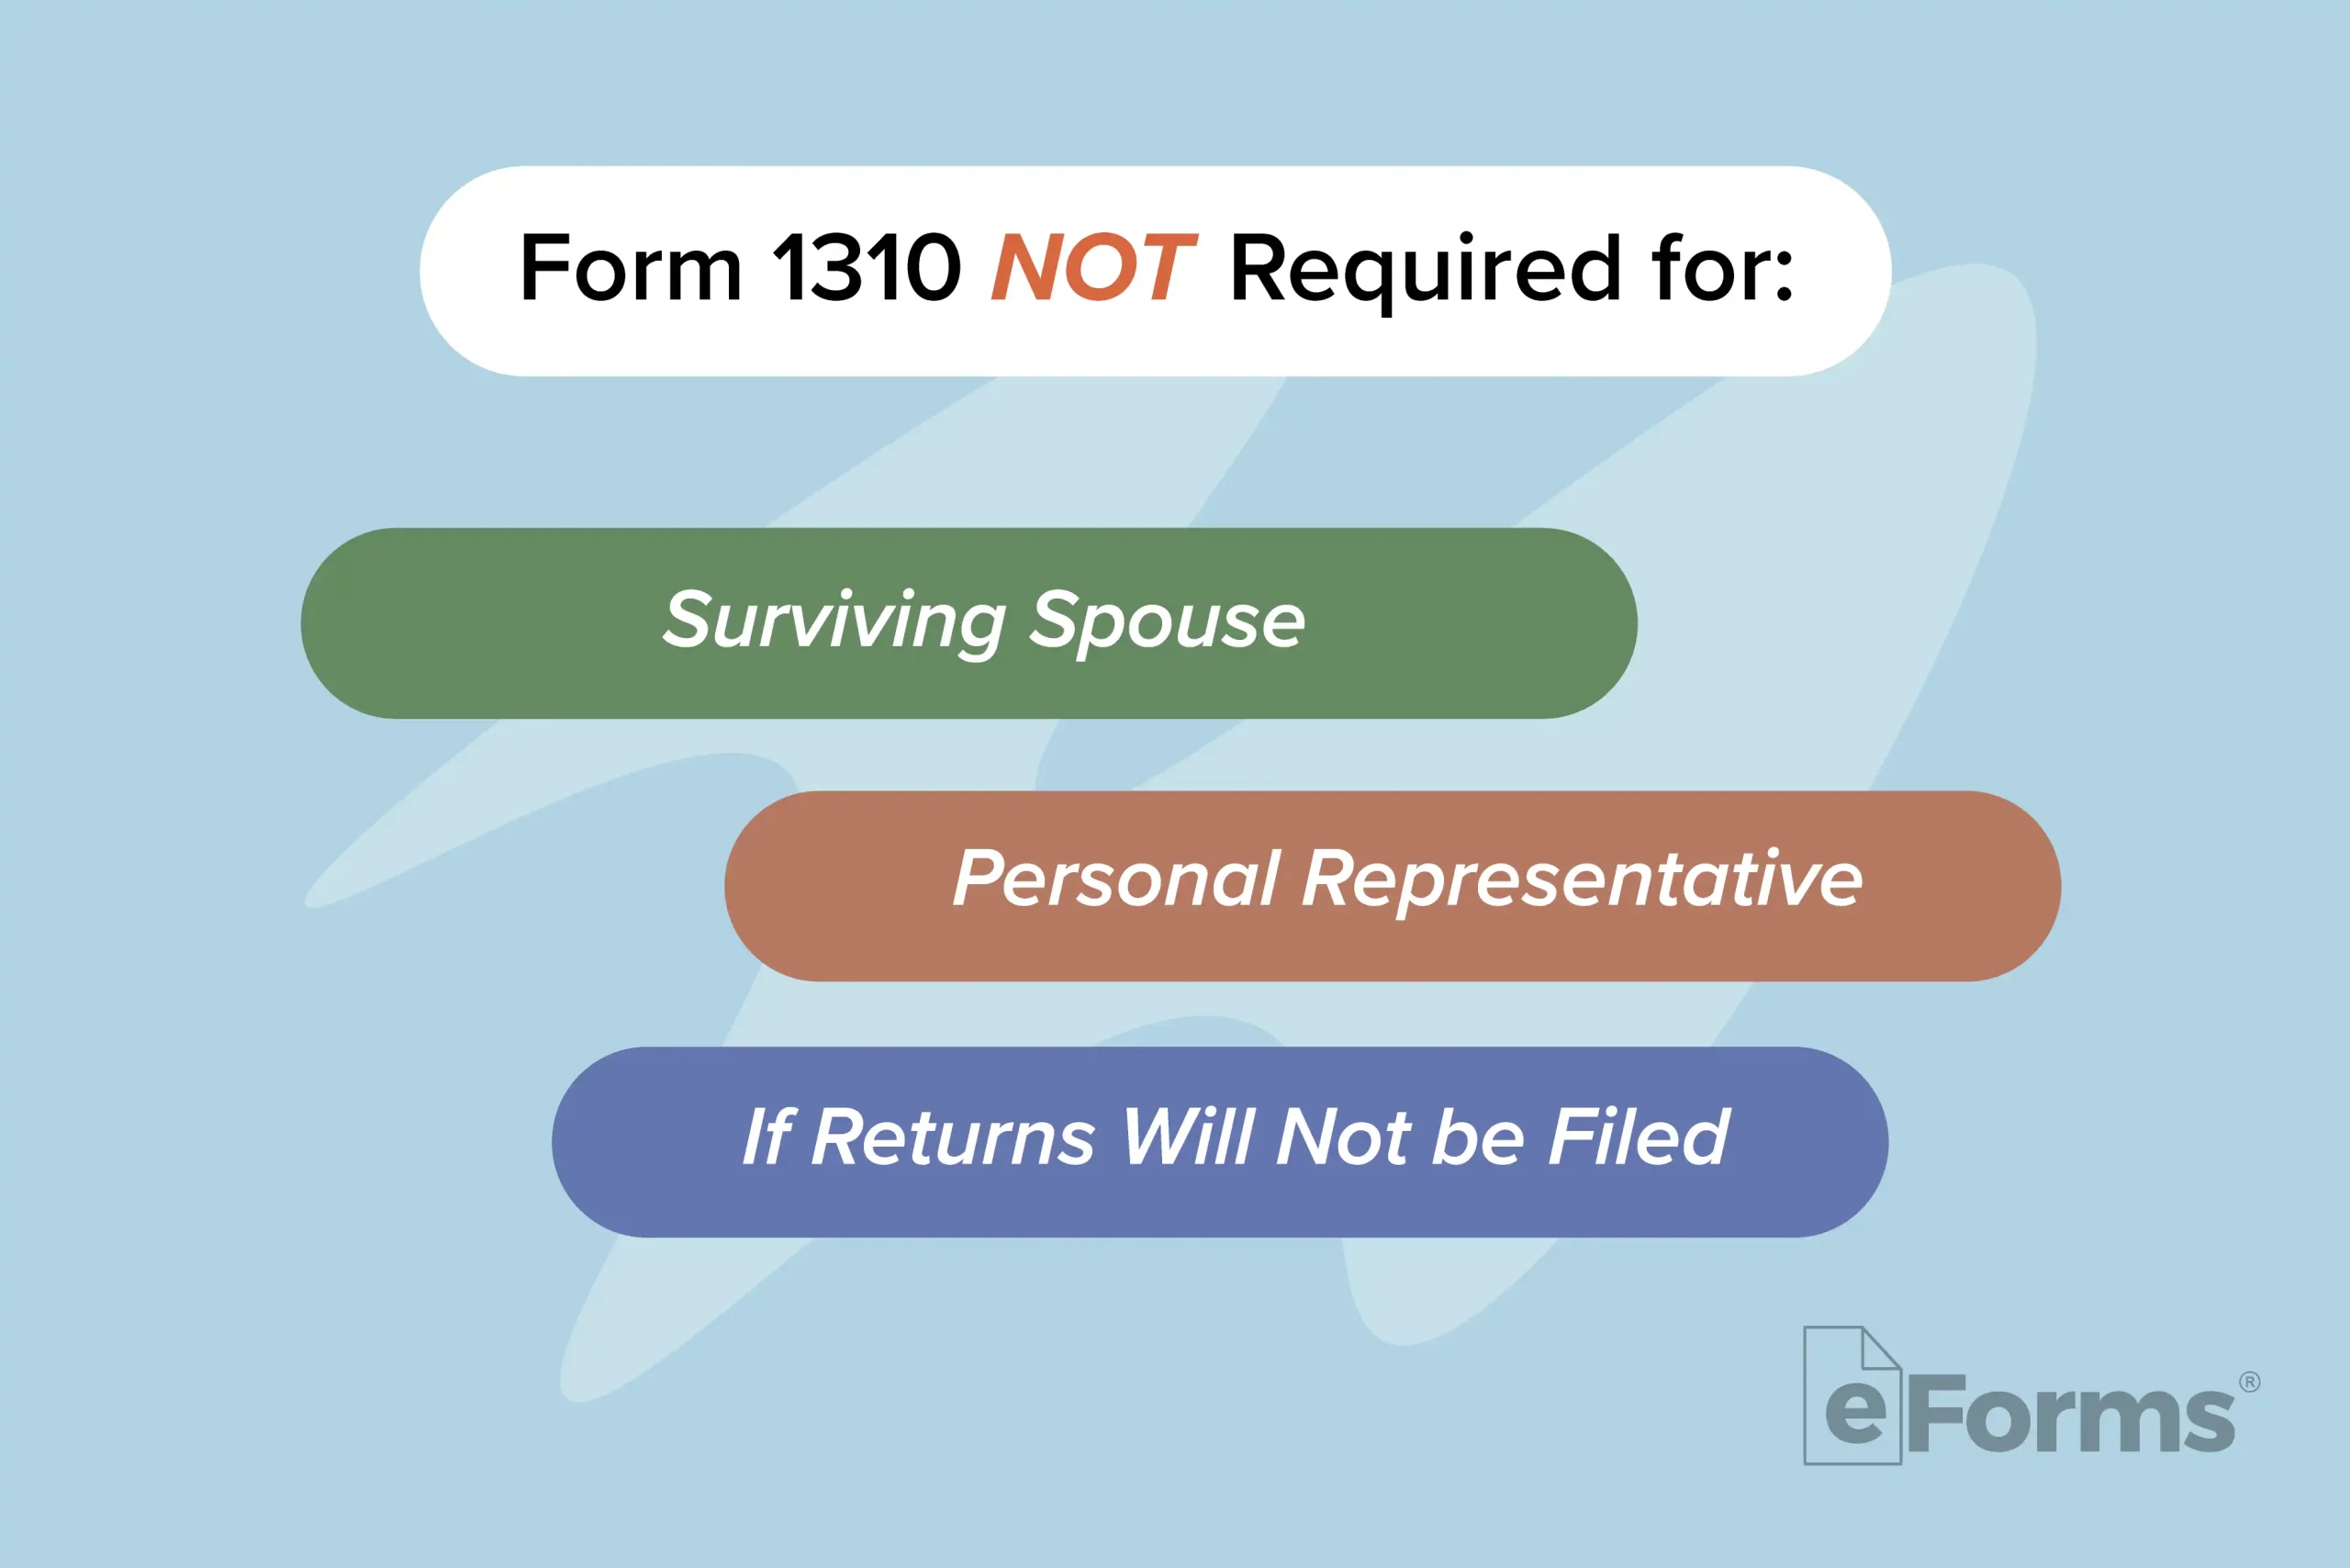 Infographic displaying when IRS Form 1310 is NOT required. 